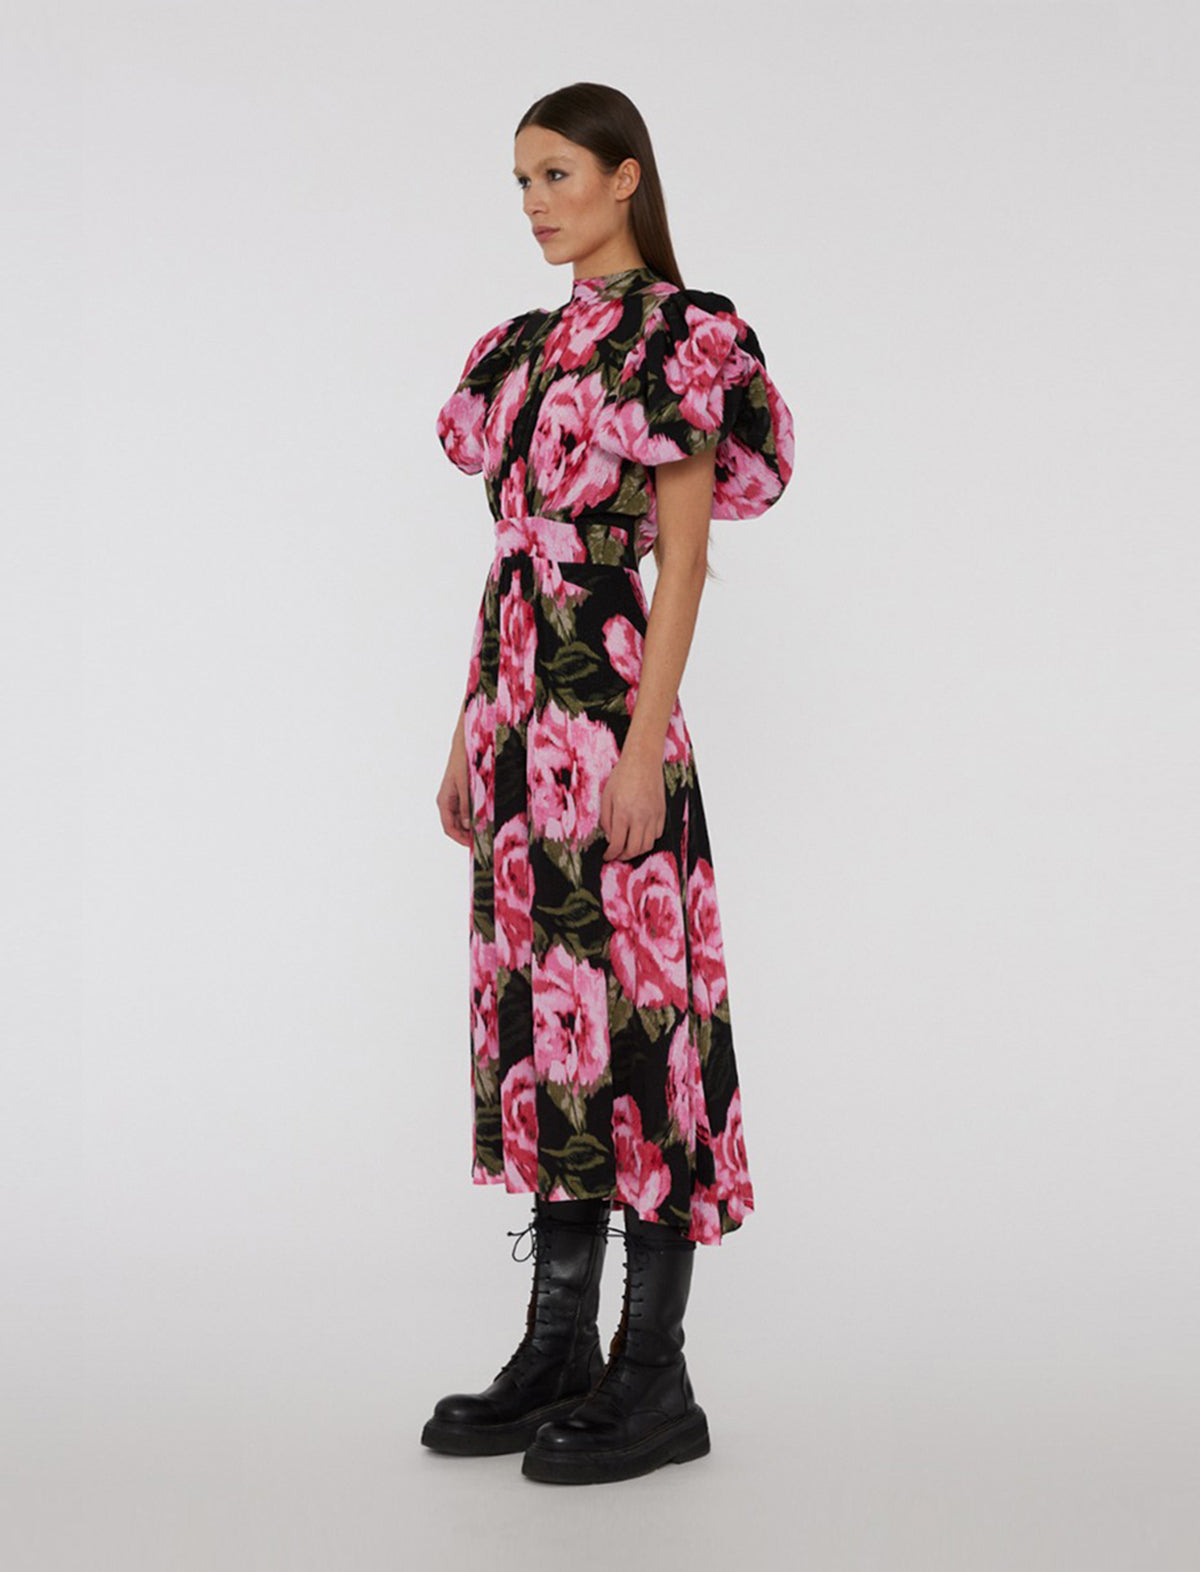 ROTATE BIRGER CHRISTENSEN Jacquard Noon Floral Dress in Black and Red